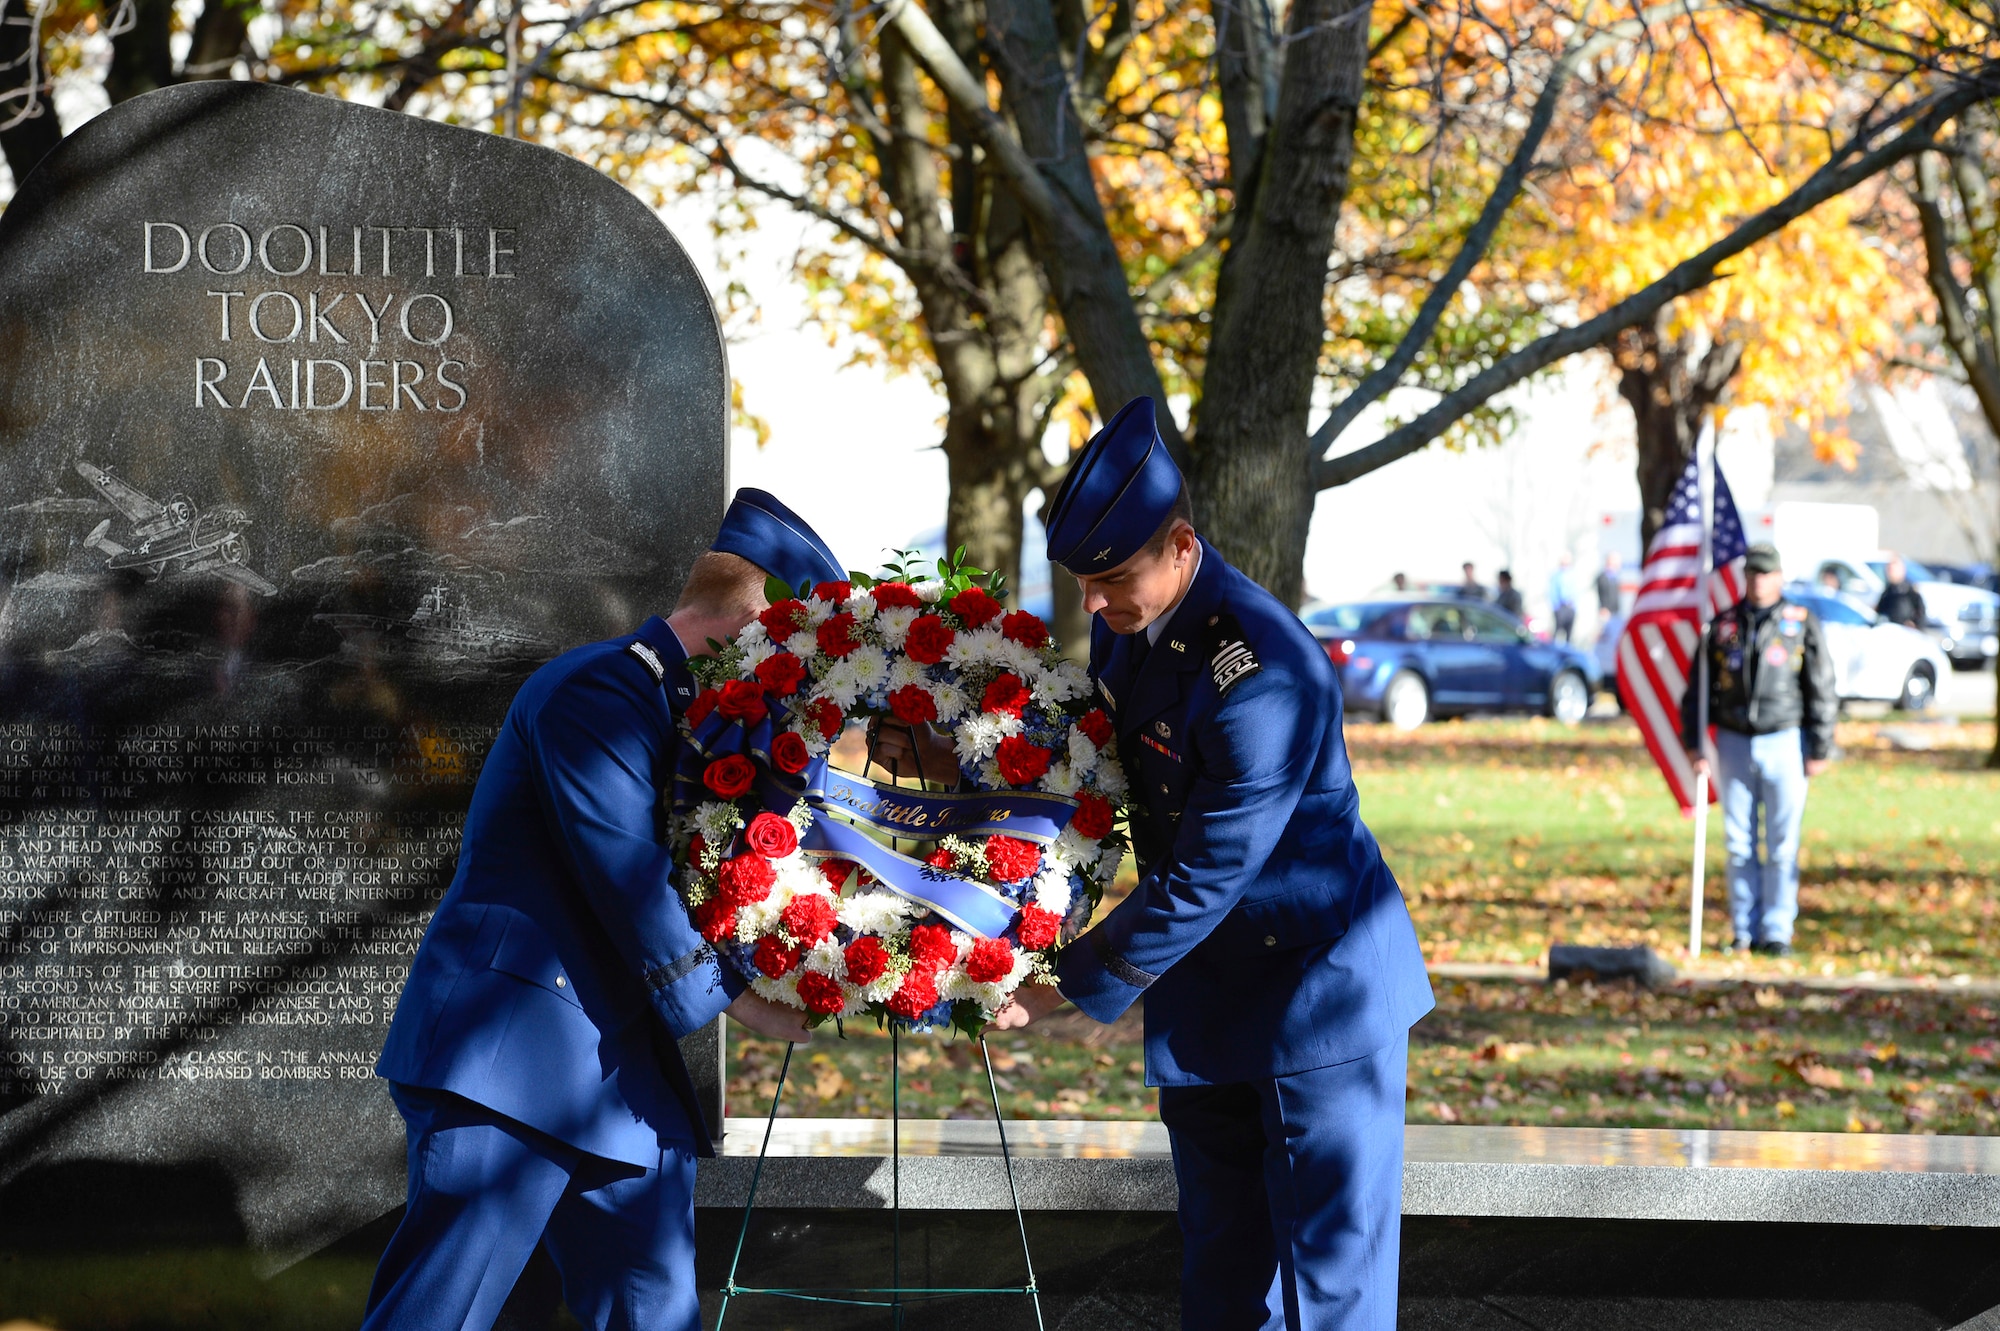 Air Force Academy cadets lay a wreath during the Doolittle Tokyo Raiders memorial at the National Museum of the U.S. Air Force Nov. 09, 2013 in Dayton, Ohio. The remaining Raiders paid tribute to their memorial and commemorated their historic mission and fallen wingmen during their final toast ceremony. (U.S. Air Force photo/Desiree N. Palacios)